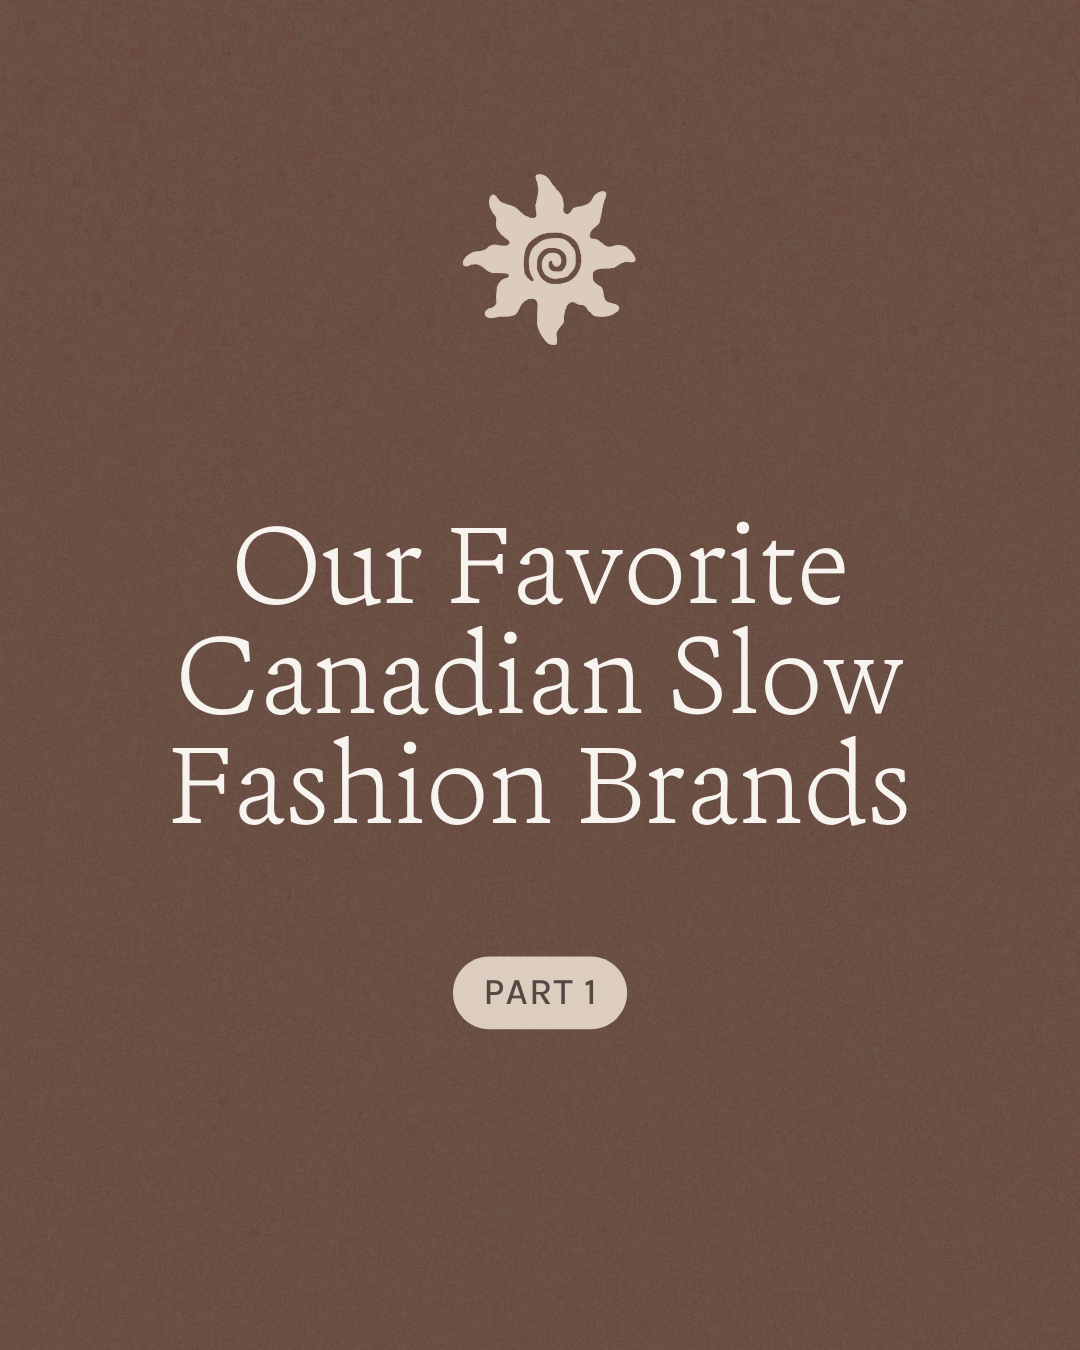 Our favorite Canadian Slow Fashion Brands